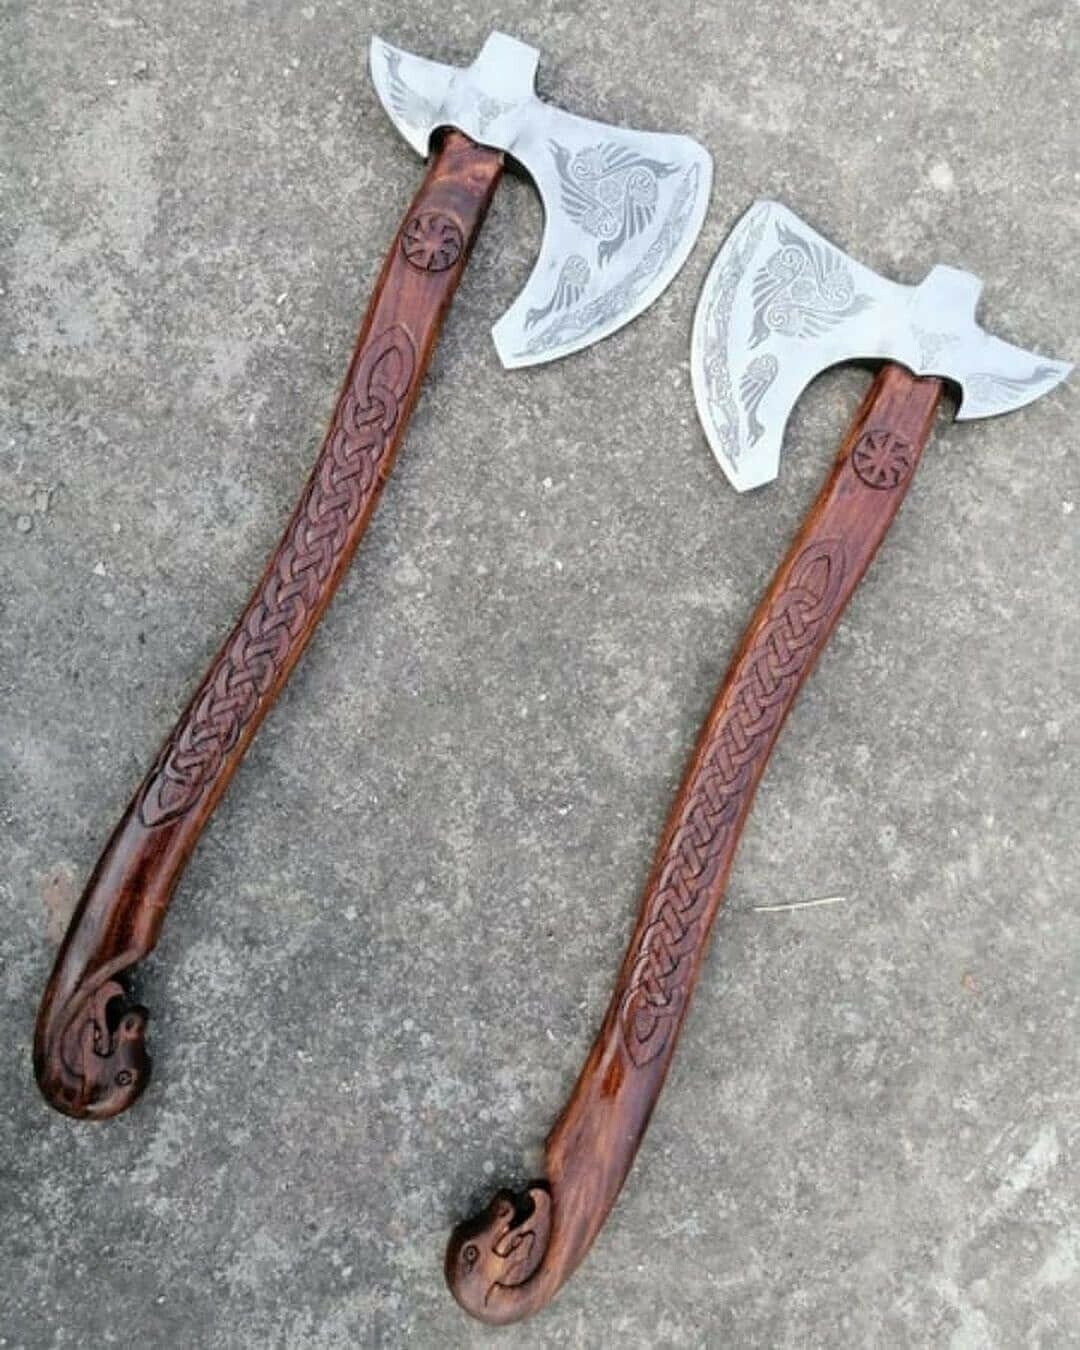 Smith Hand Forged Carbon steel Pair Of Viking Tomahawk Axes With Leather SHEATH 